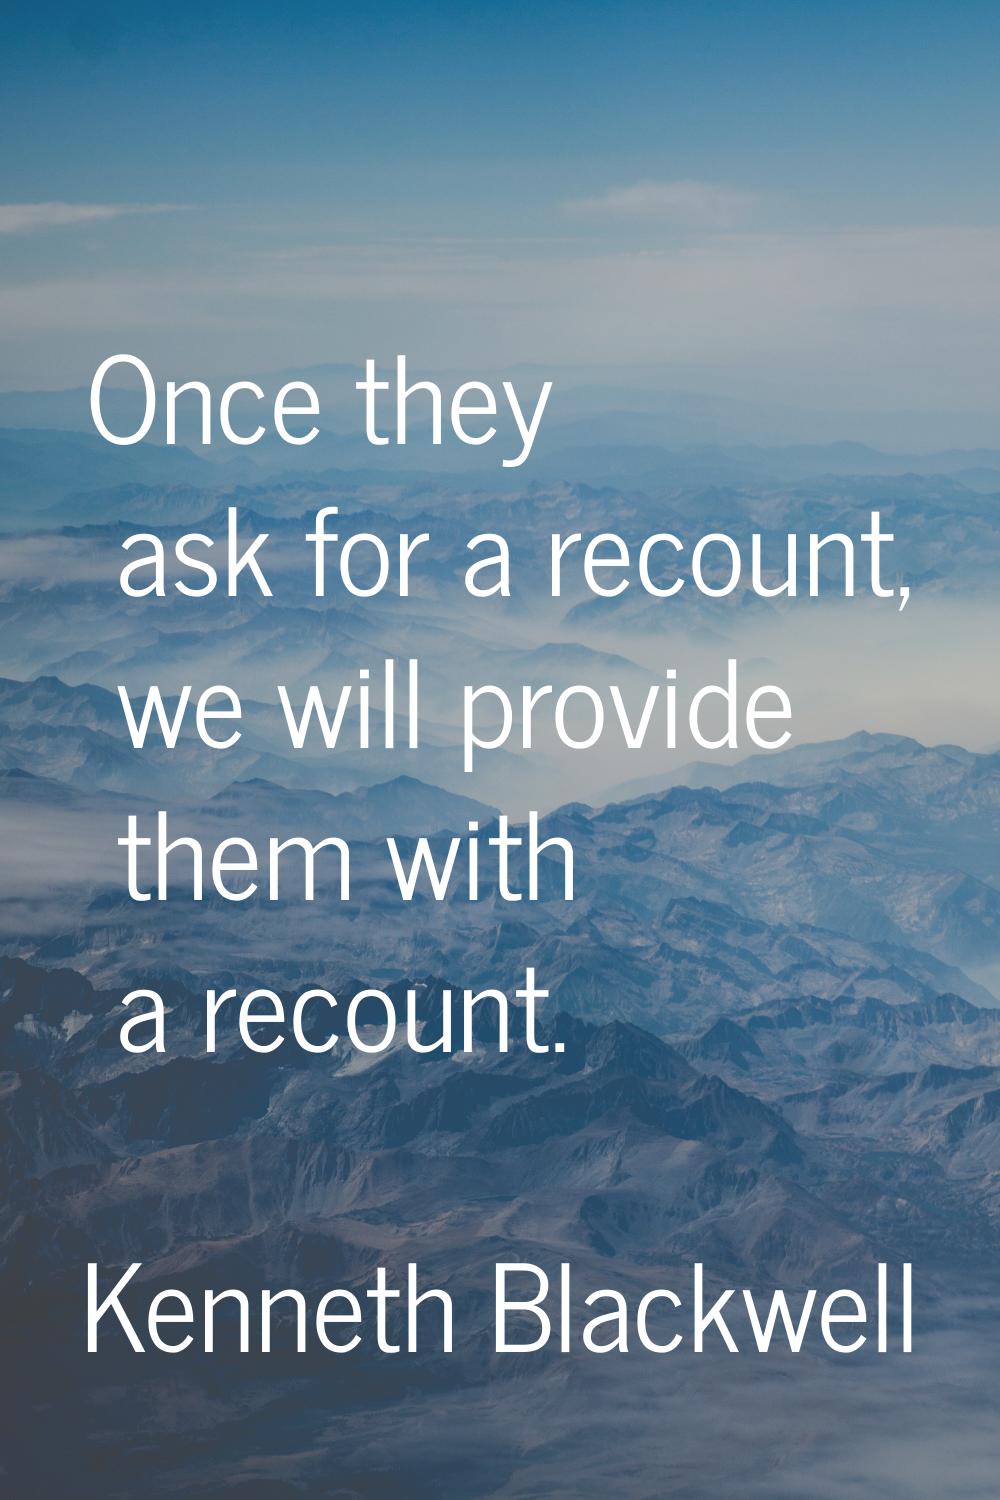 Once they ask for a recount, we will provide them with a recount.